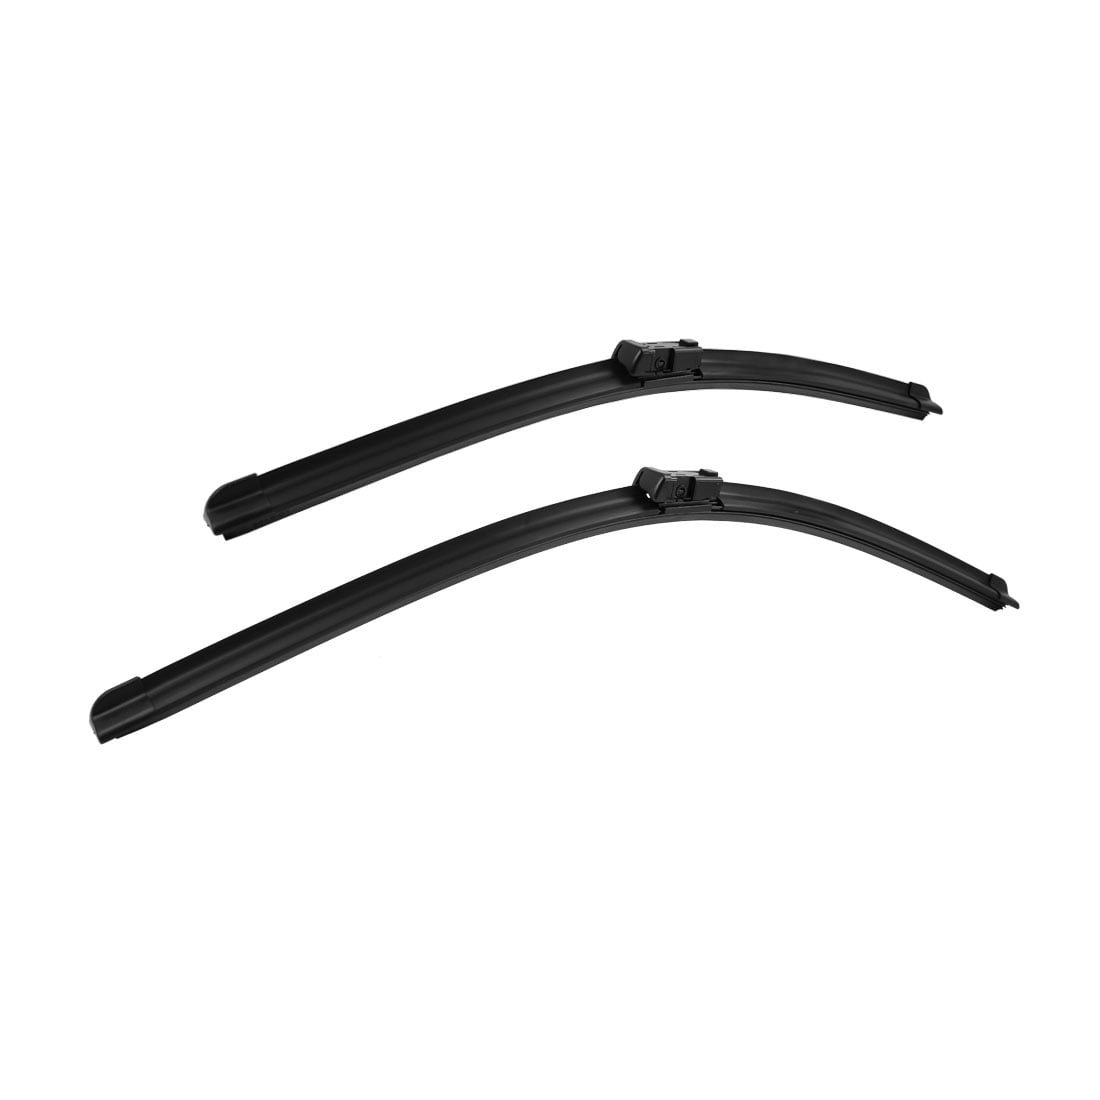 24" 17" Exact Fit Front Windshield Wiper Blades for Chevrolet Equinox 2010 2011 2012 2013 2014 Windshield Wiper Blades For 2013 Chevy Equinox